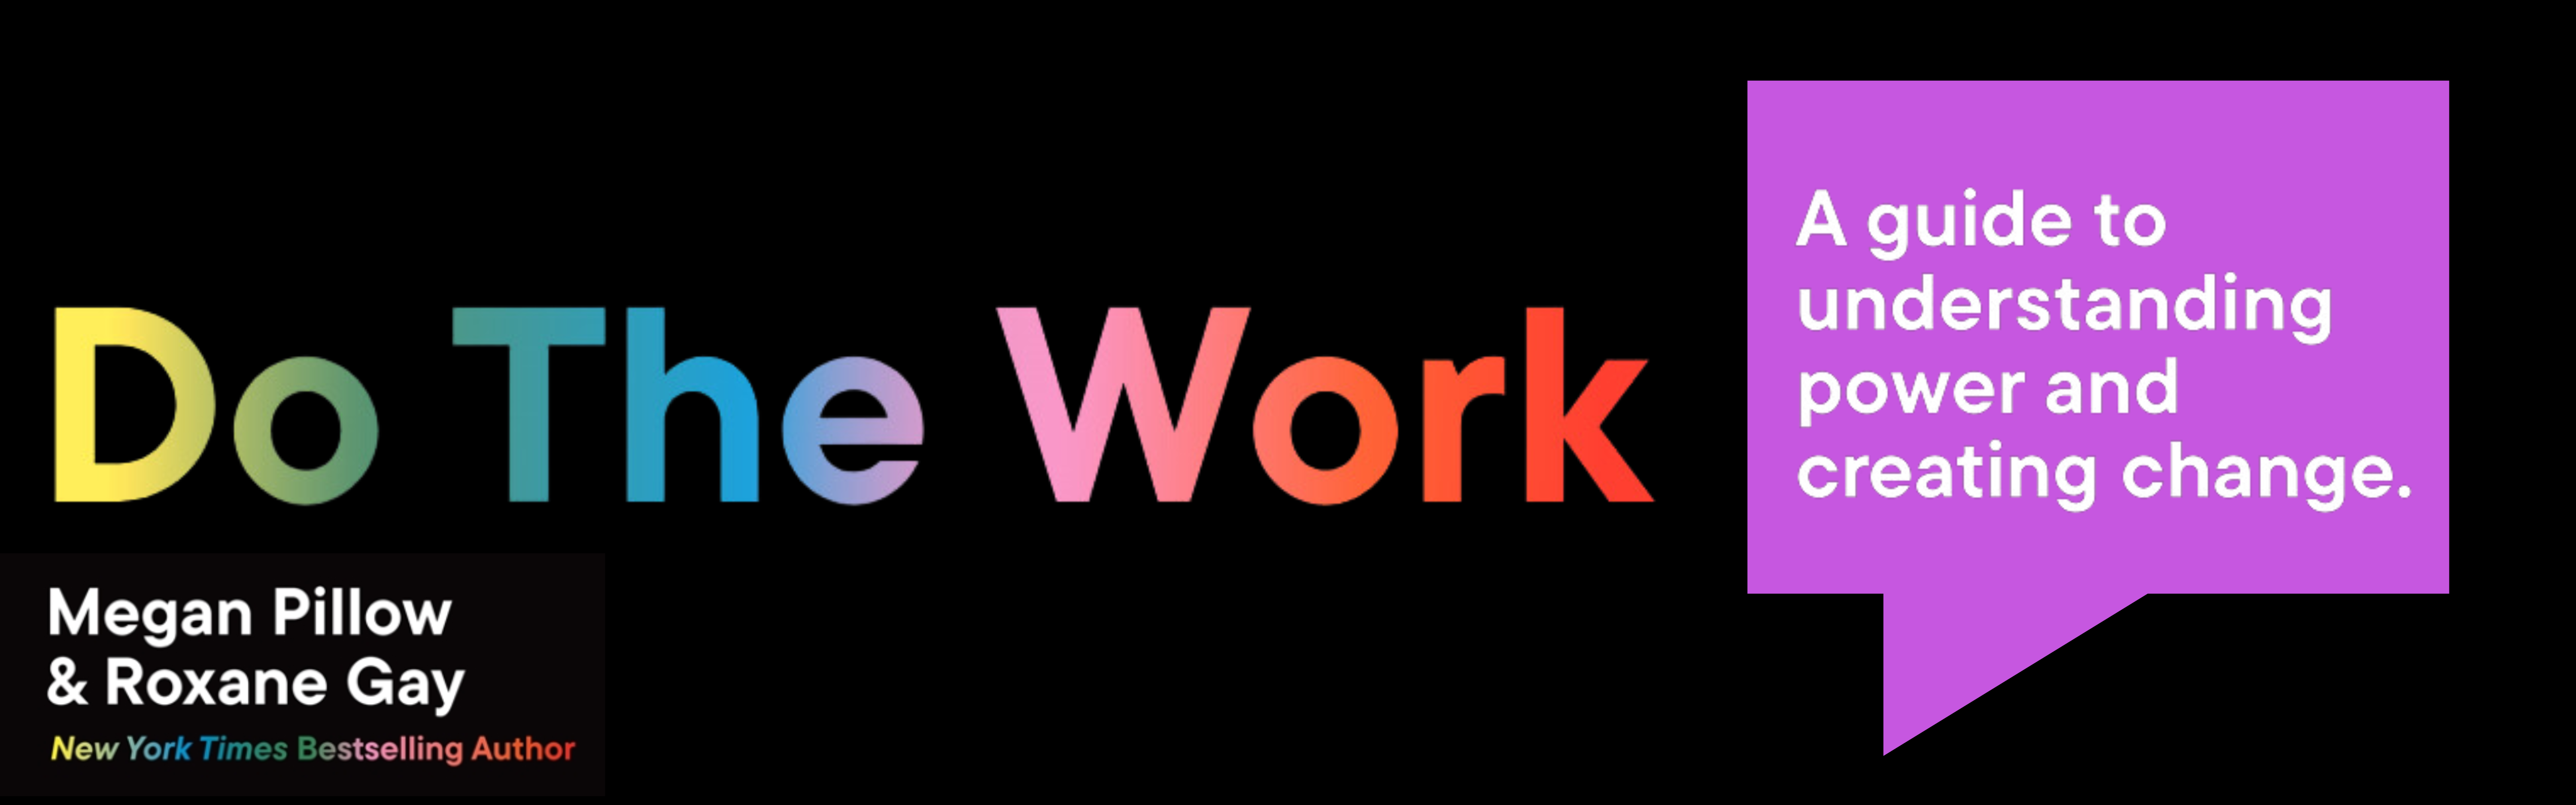 Do-the-Work Banner